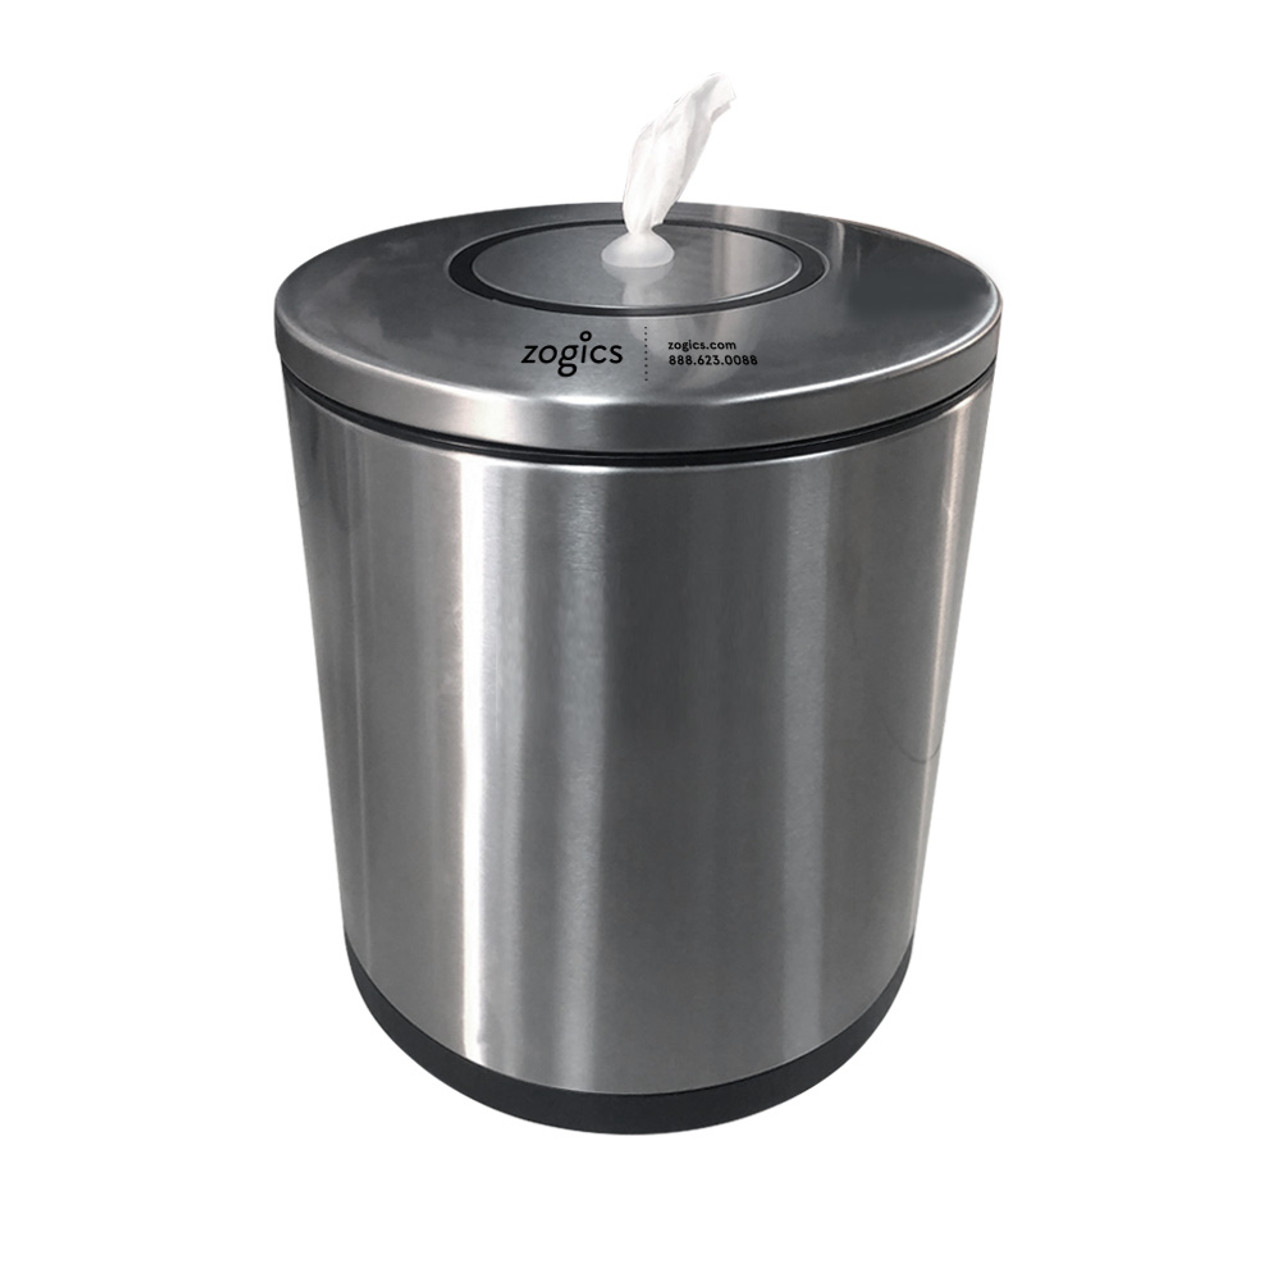 Stainless Steel Wipes Dispenser And Wipes